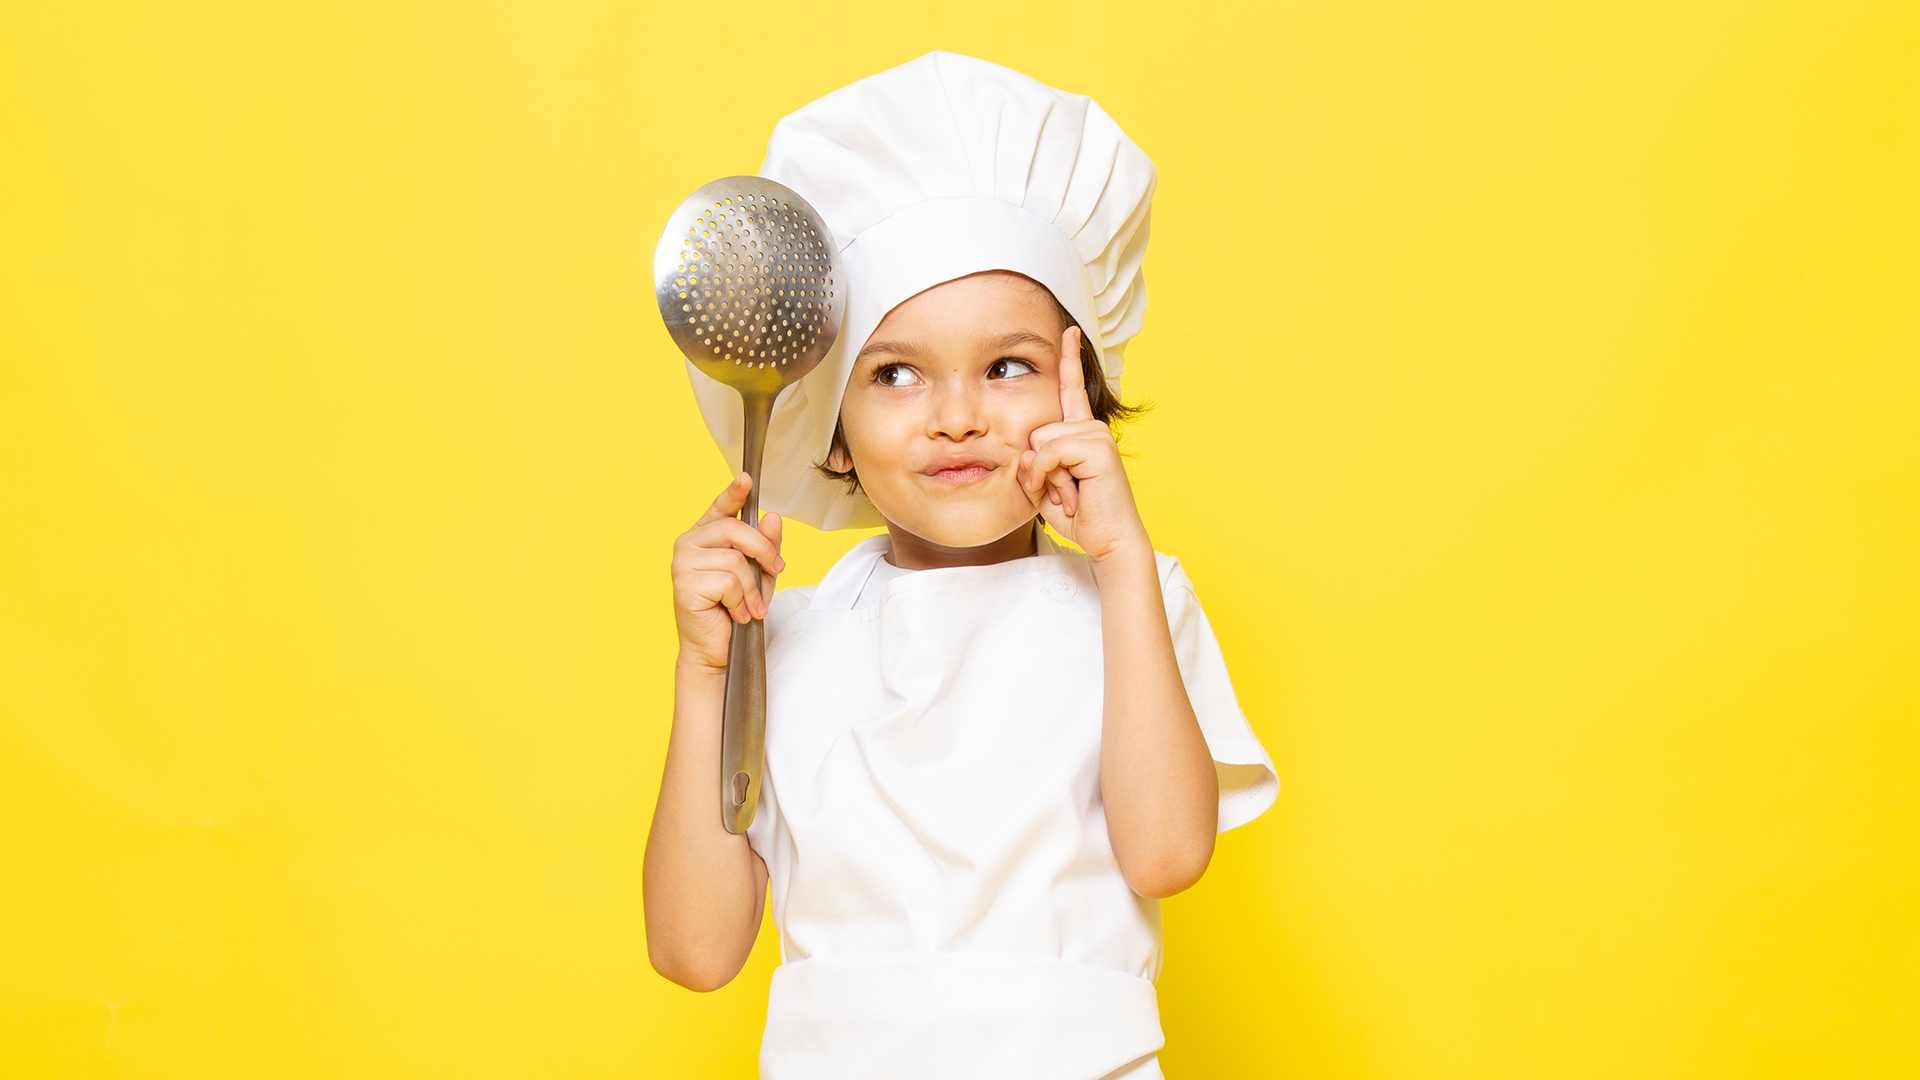 young boy wearing a chef's hat thinking about what to cook